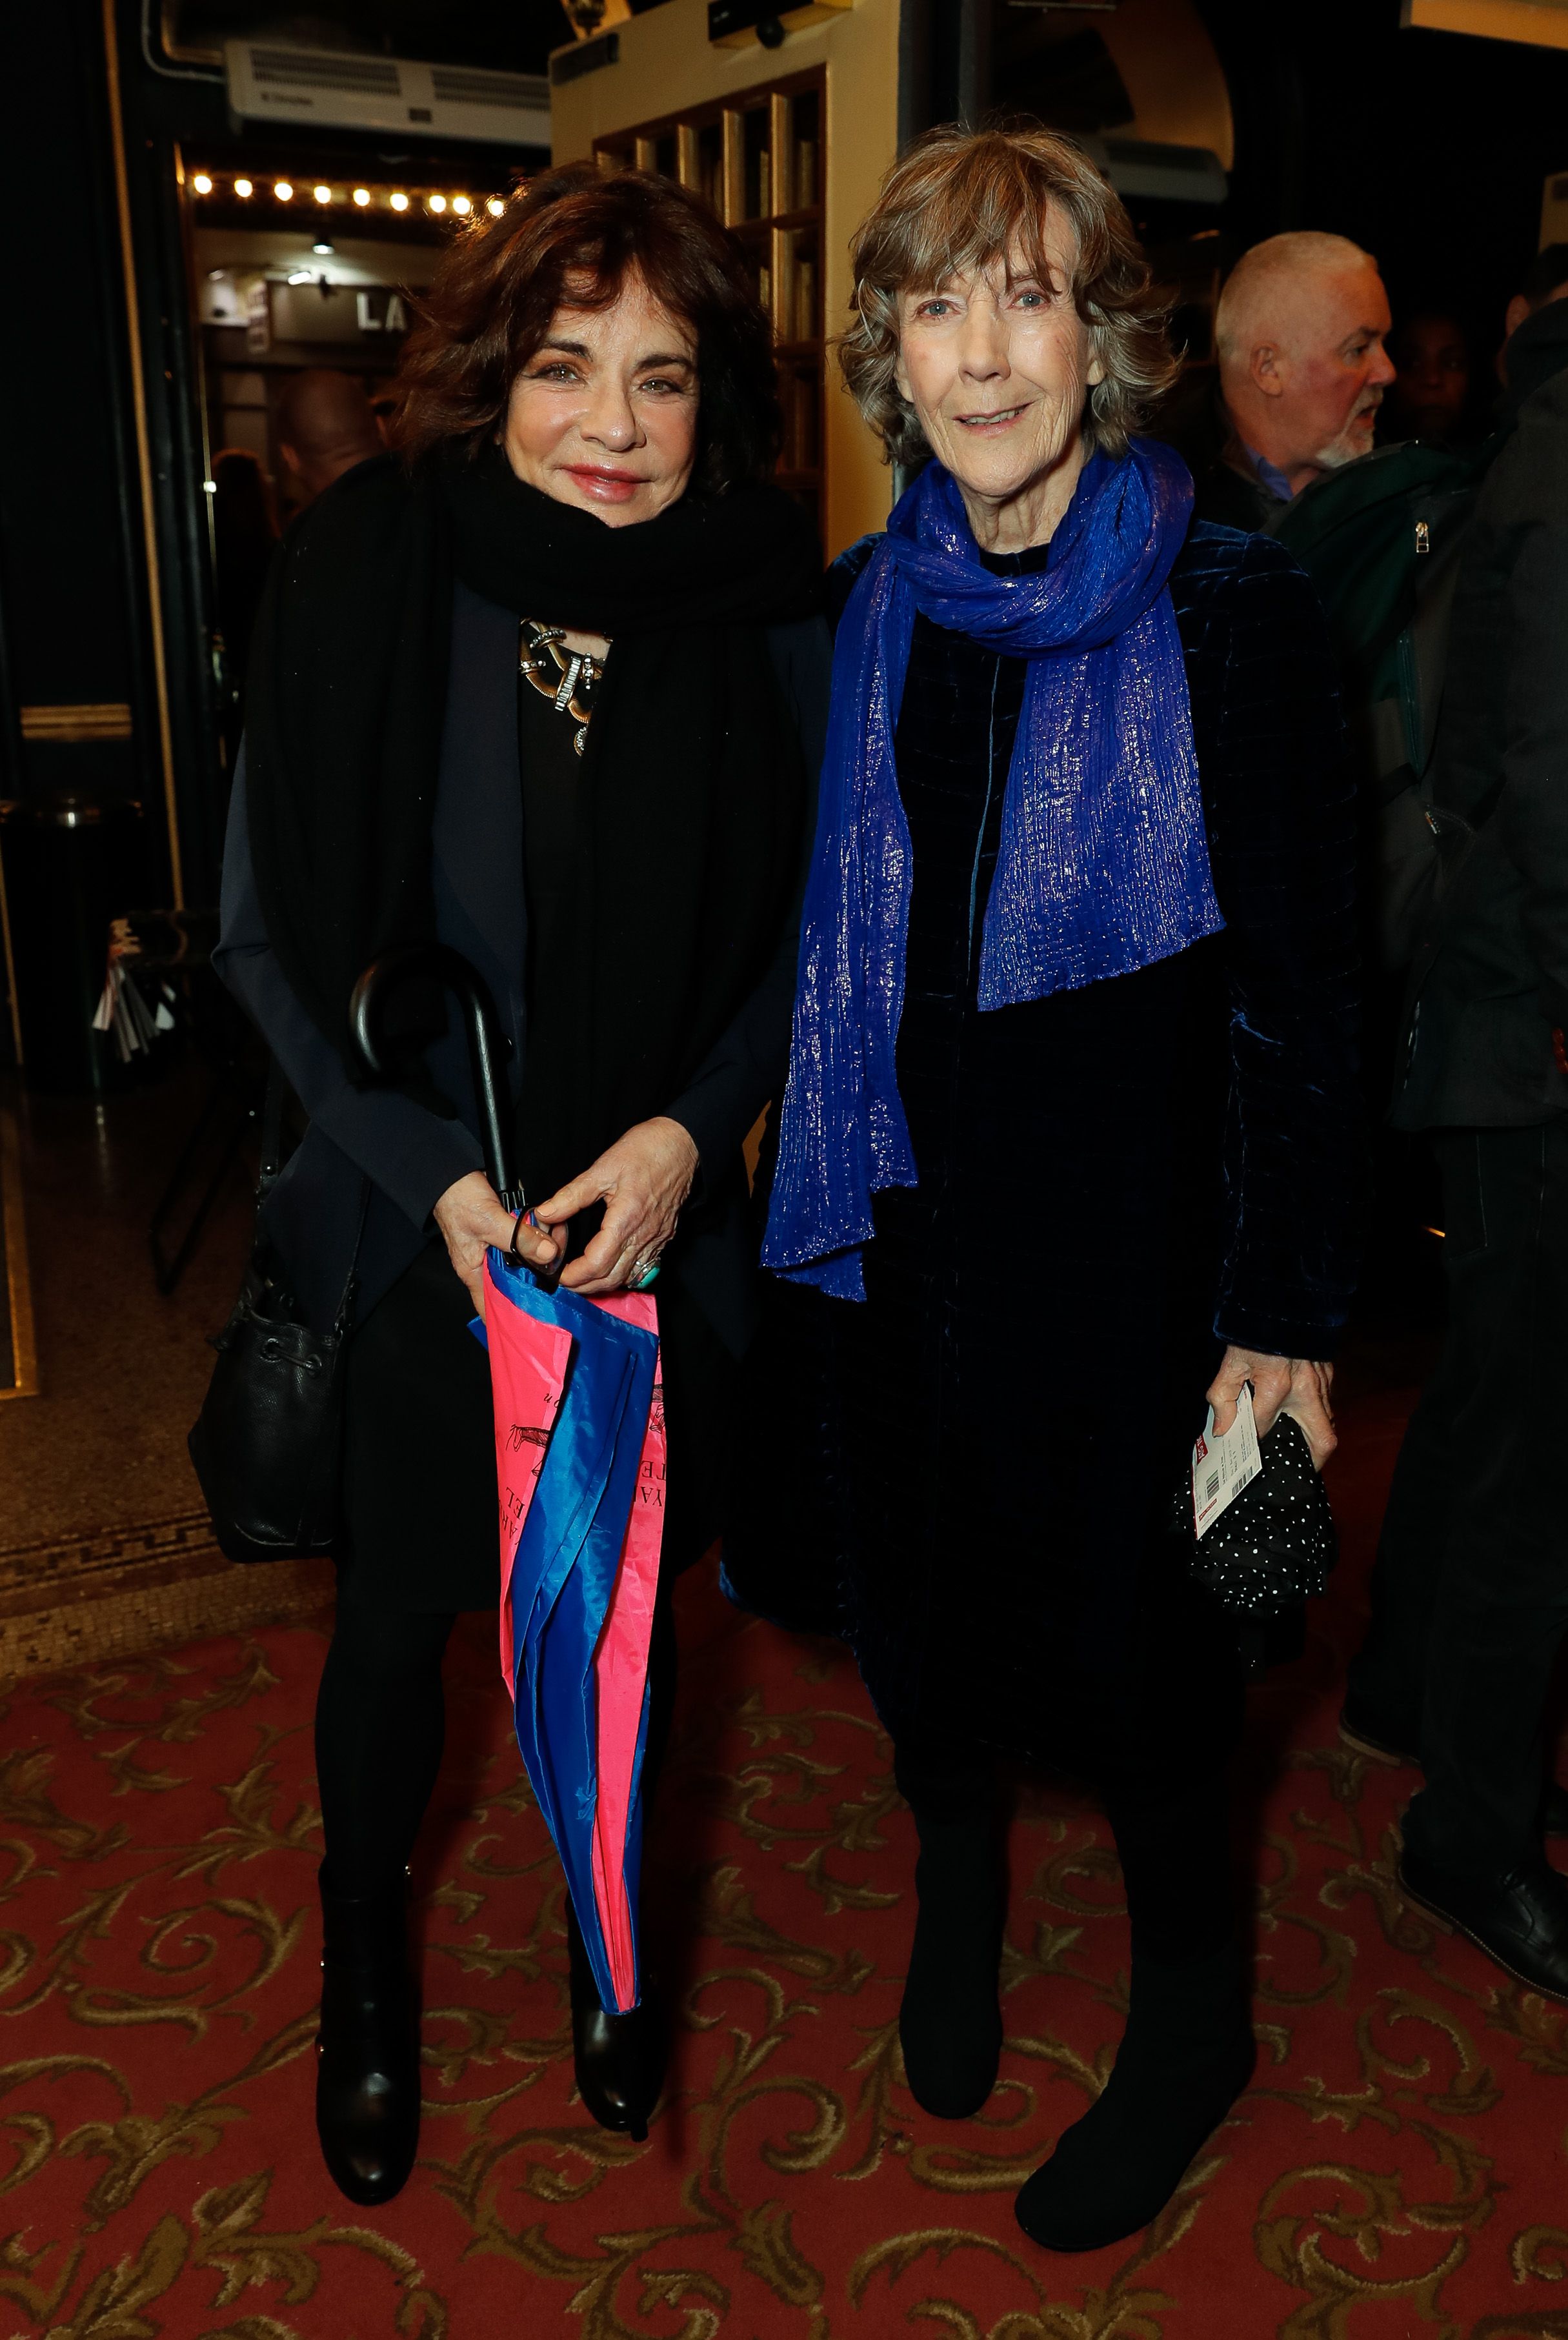 Stockard Channing and Eileen Atkins attend the press night performance of "Ian McKellen On Stage", a special one man show celebrating his 80th birthday, at Duke Of York's Theatre on March 7, 2019 in London, England. | Source: Getty Images